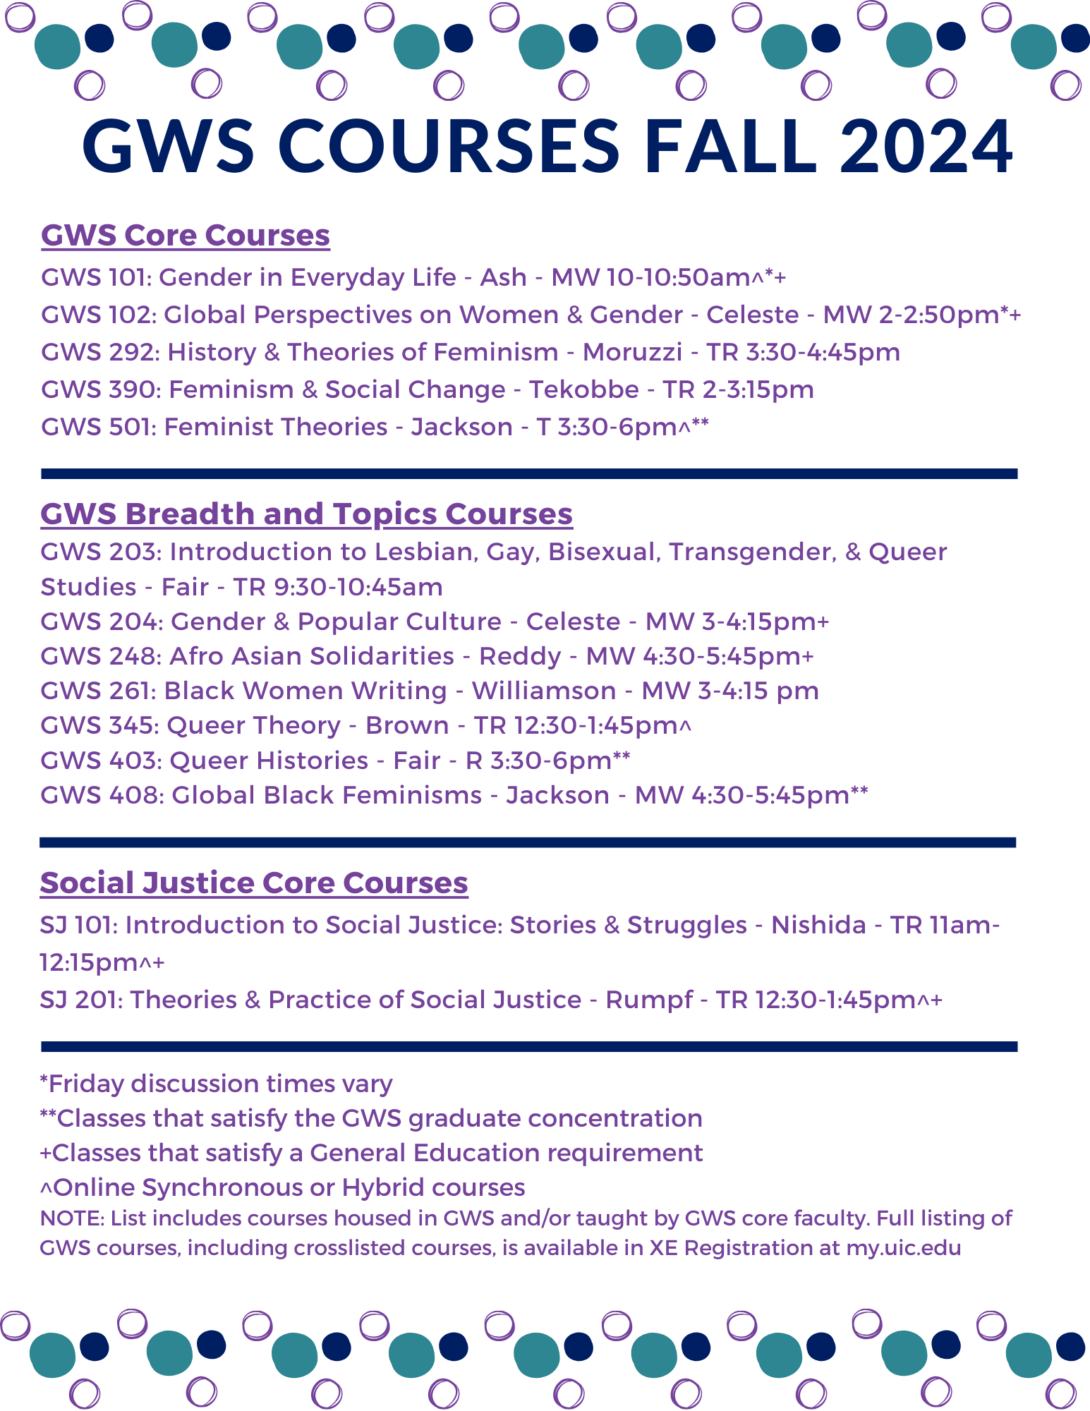 Small blue, teal, and purple circles form a border at the top and bottom of the flier. The heading GWS Courses Fall 2024 appears in dark blue text beneath the top border. Under the heading, GWS and Social Justice courses are listed in purple text.